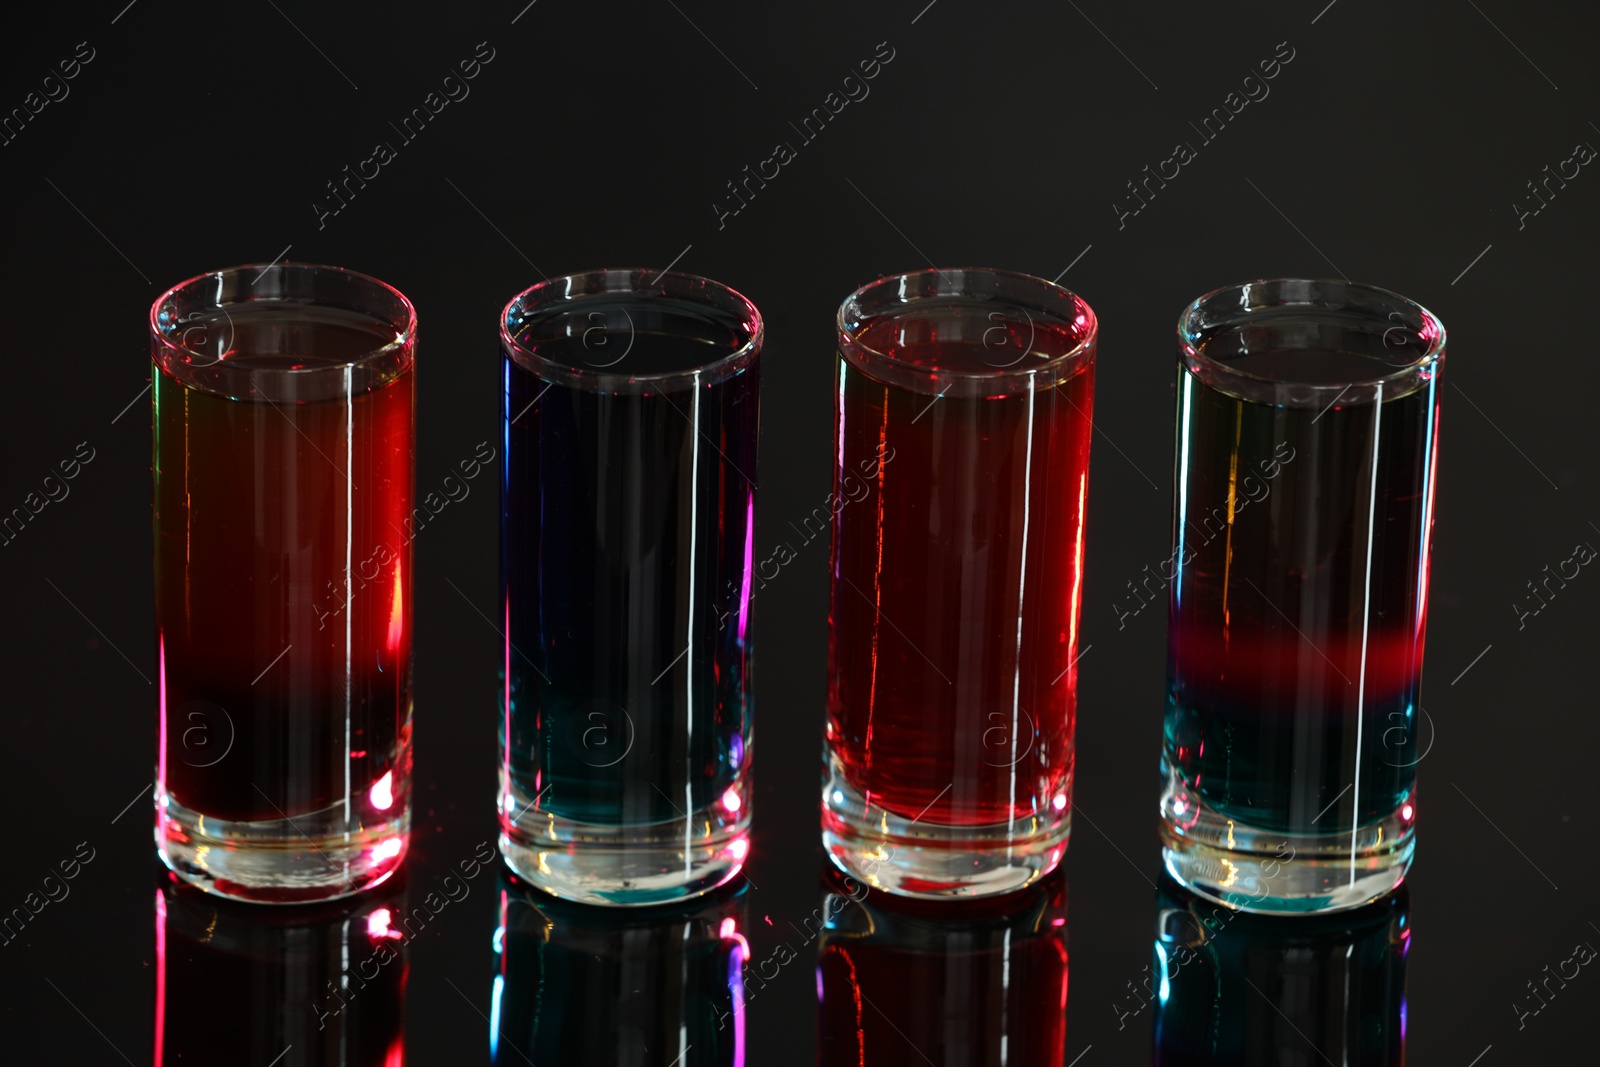 Photo of Different shooters in shot glasses on mirror surface against blurred background, closeup Alcohol drink